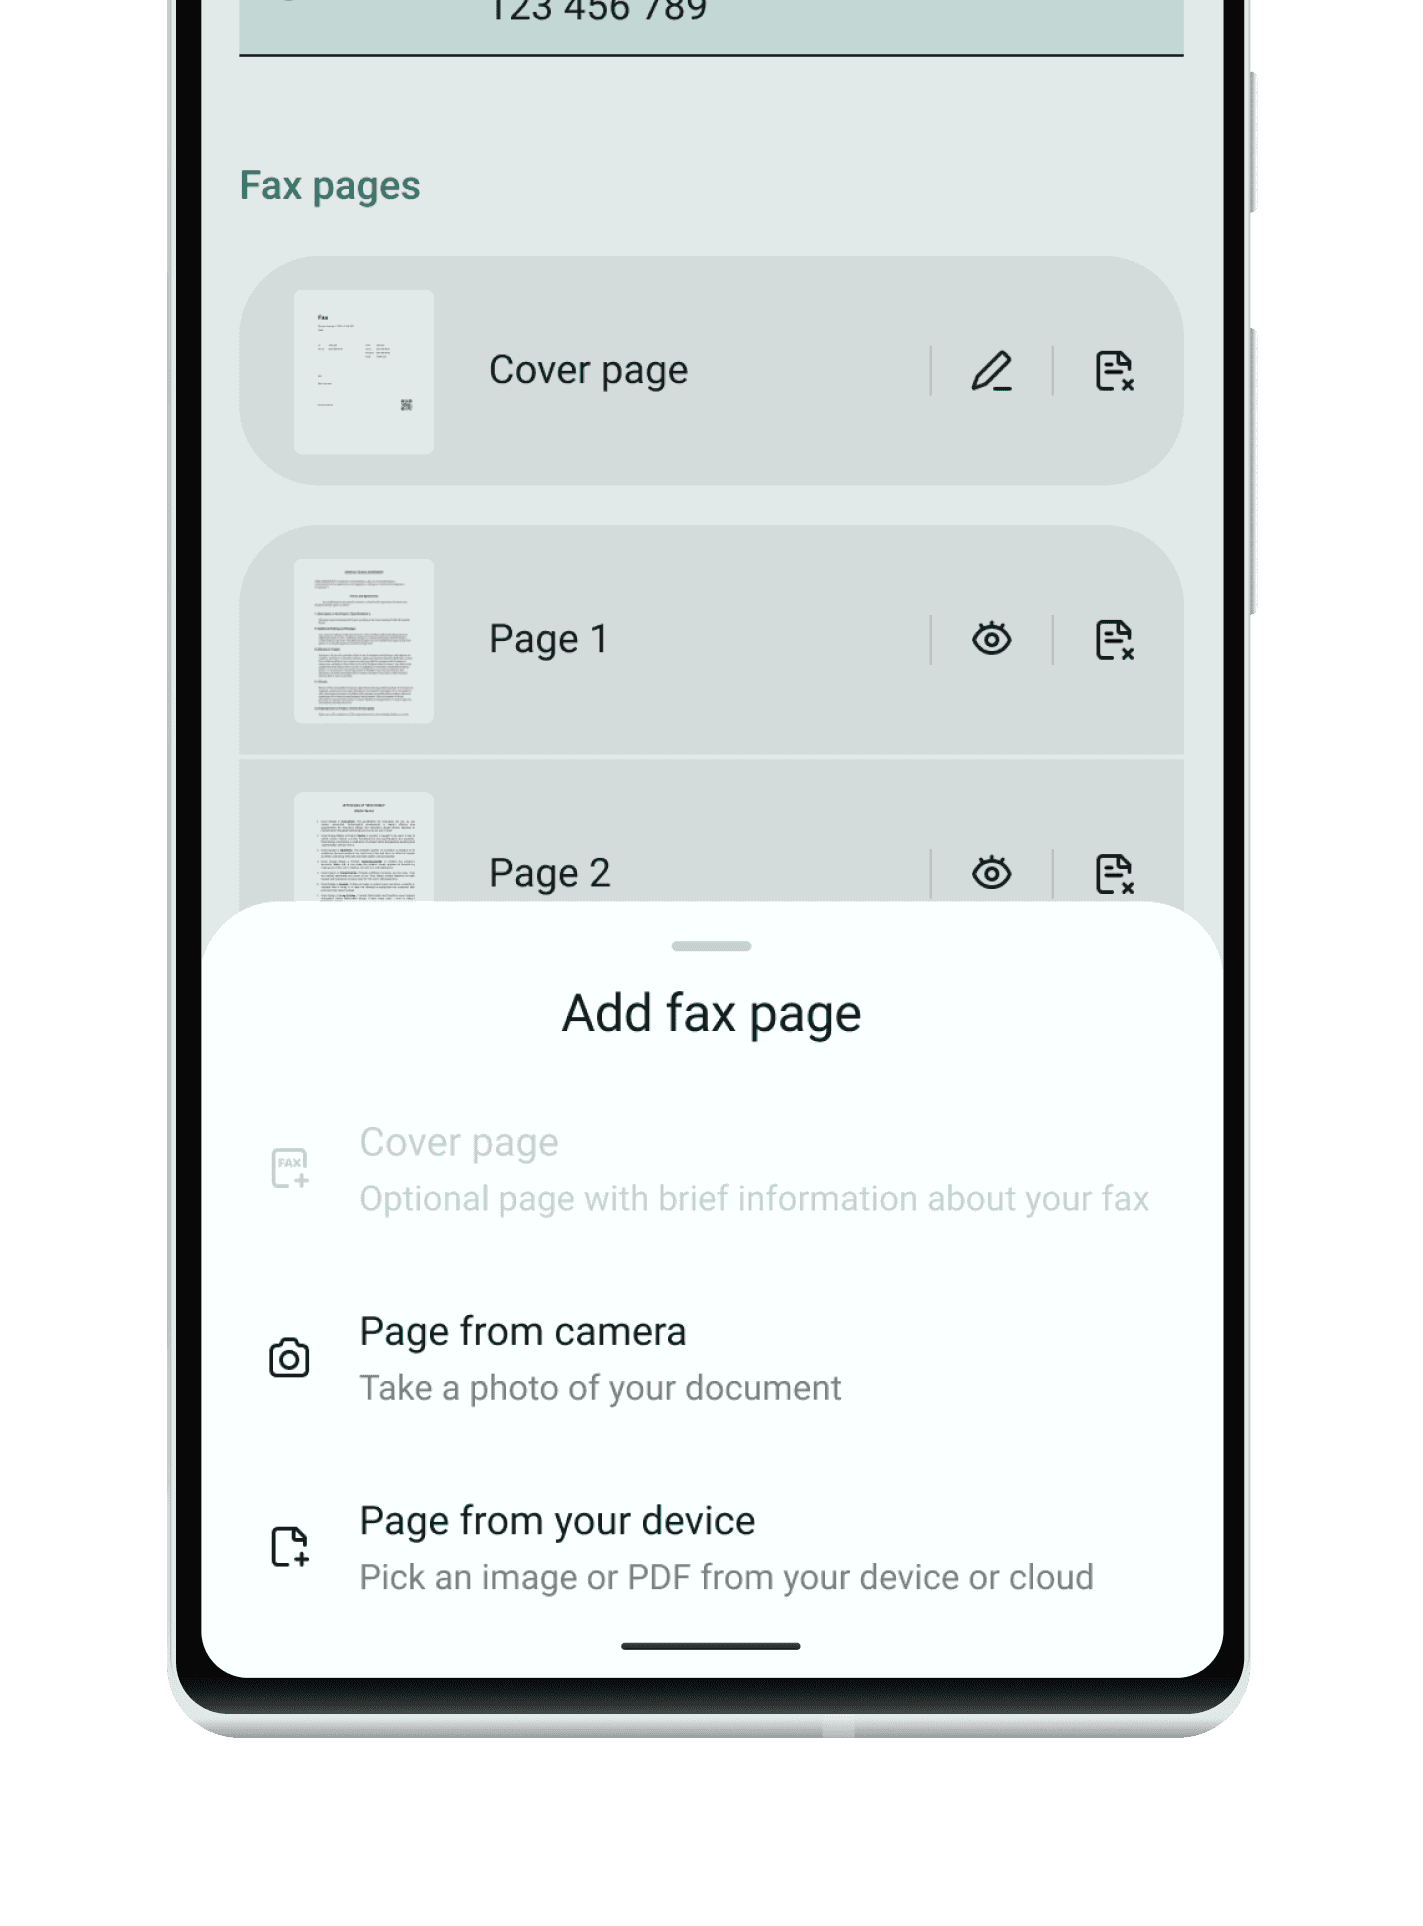 Bottom sheet with add new page actions in Android Fax app